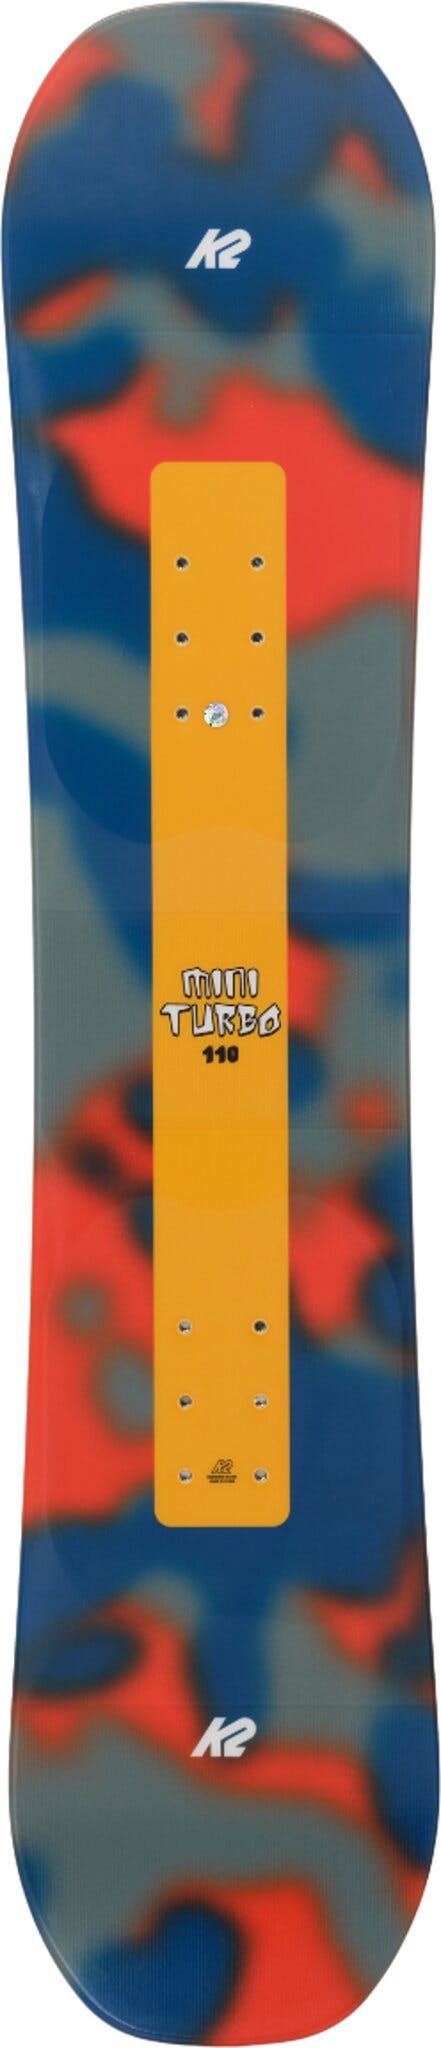 Product image for Mini Turbo Snowboard - Youth